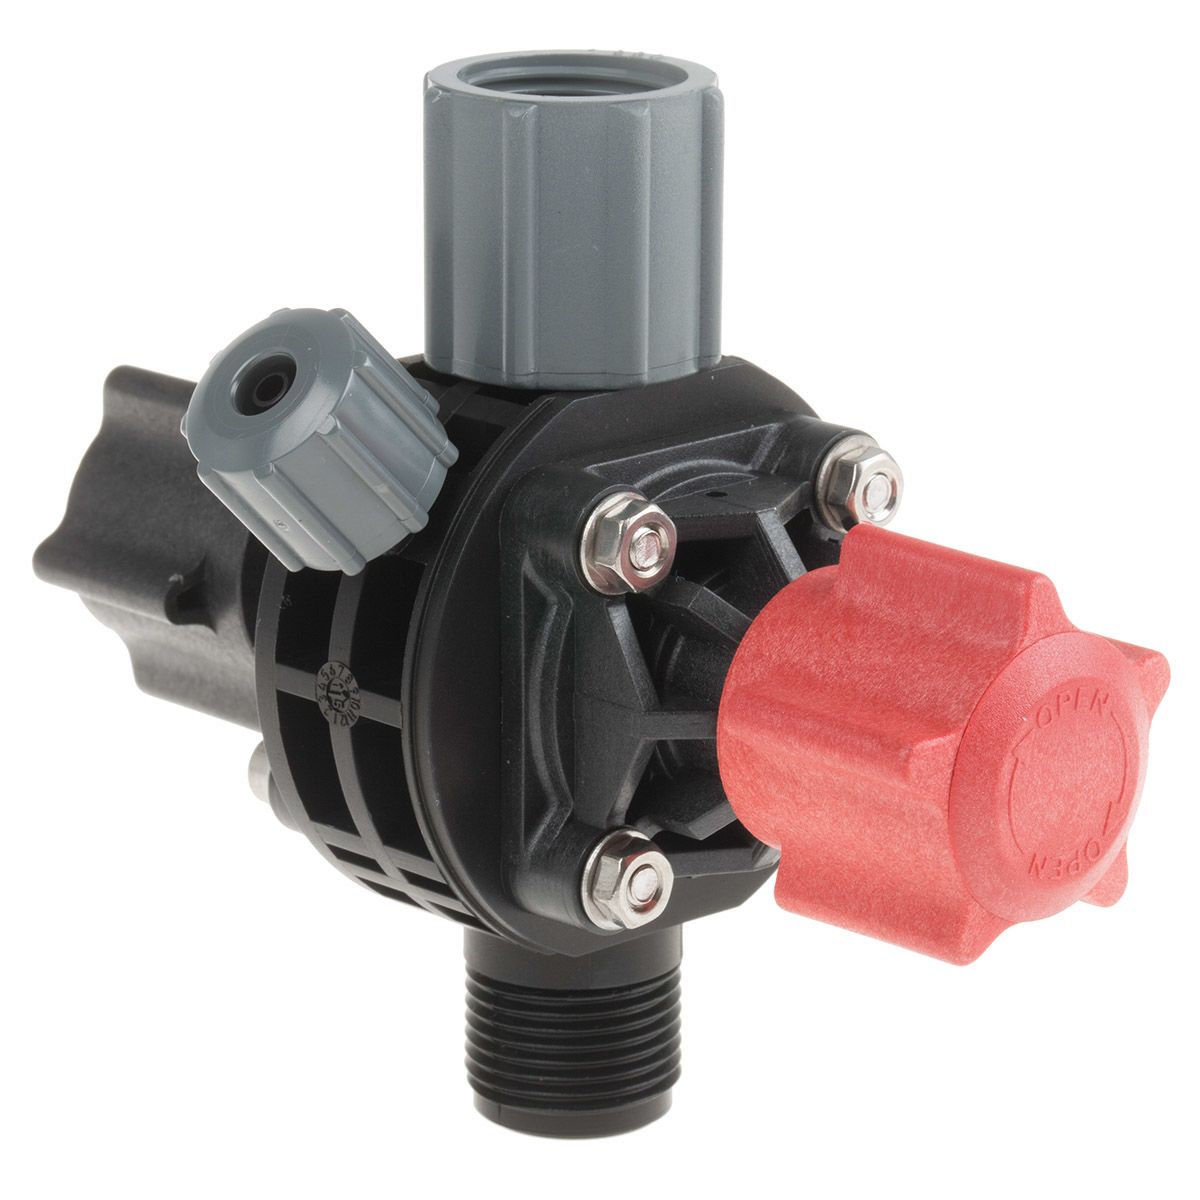 ProMinent Pump Accessory, Multi-function Valve for use with Pumps